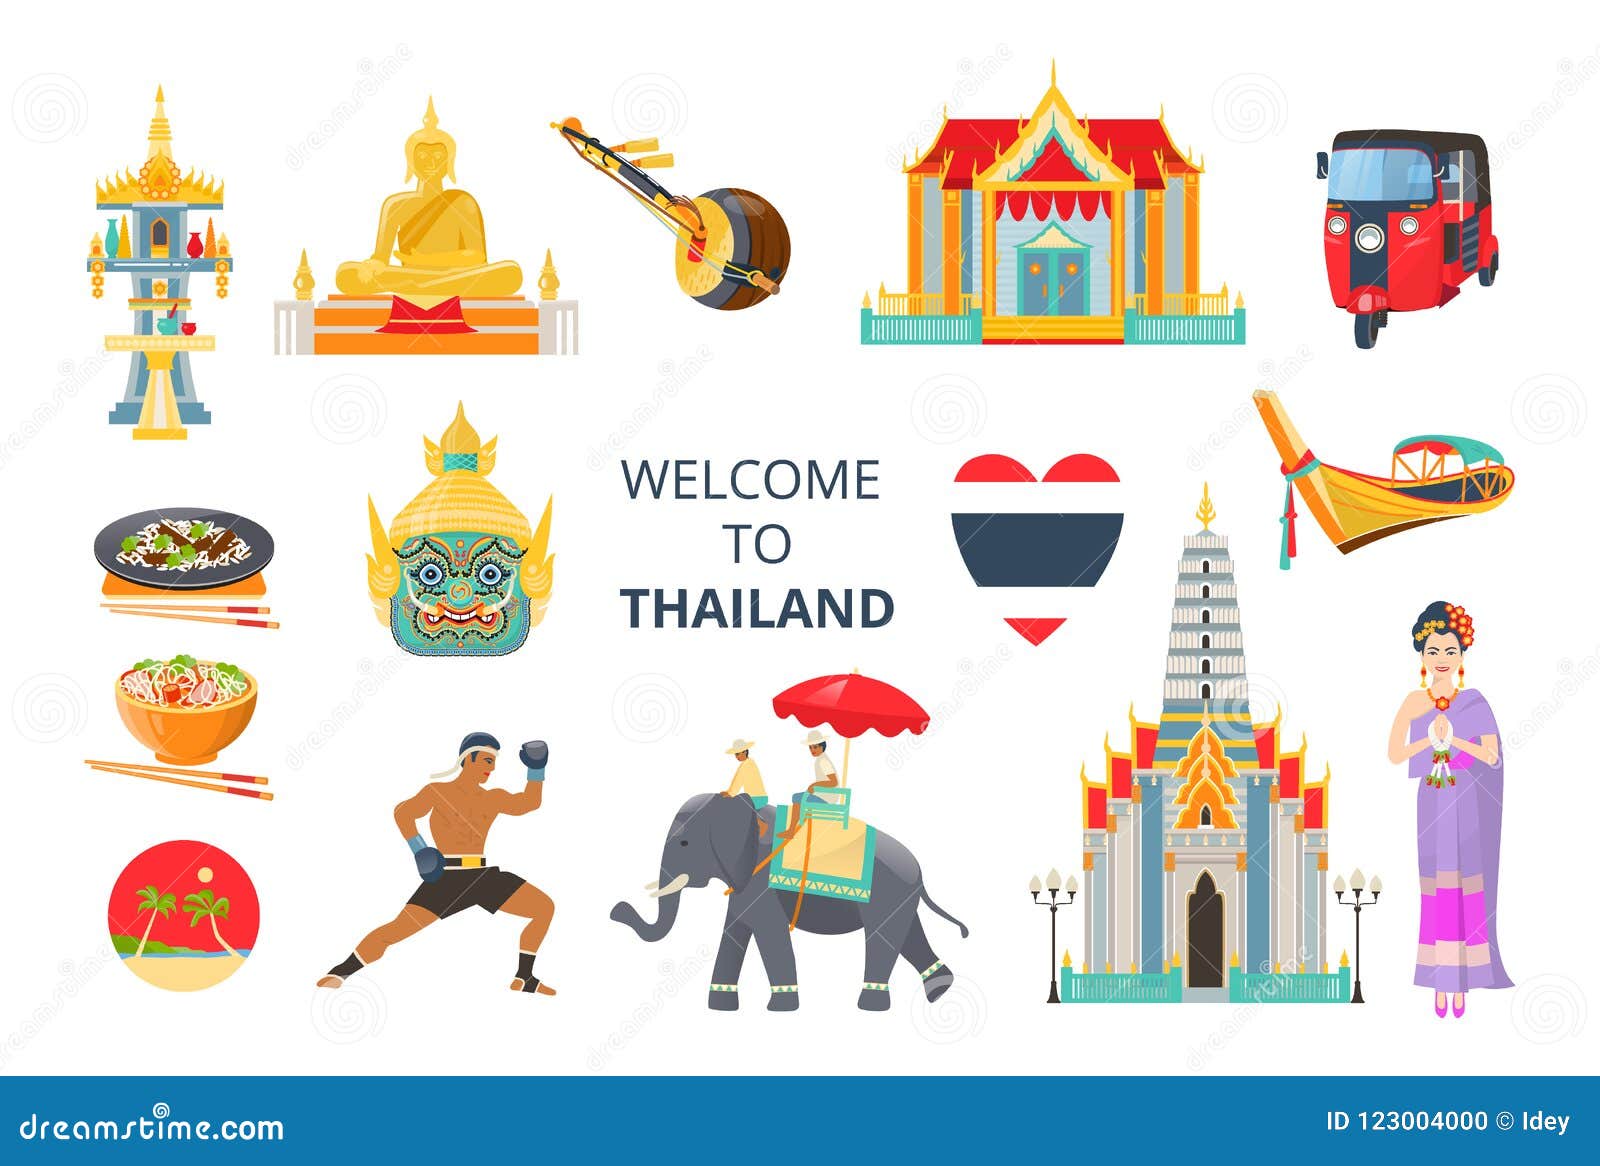 welcome to thailand. traditions and culture of thailand.